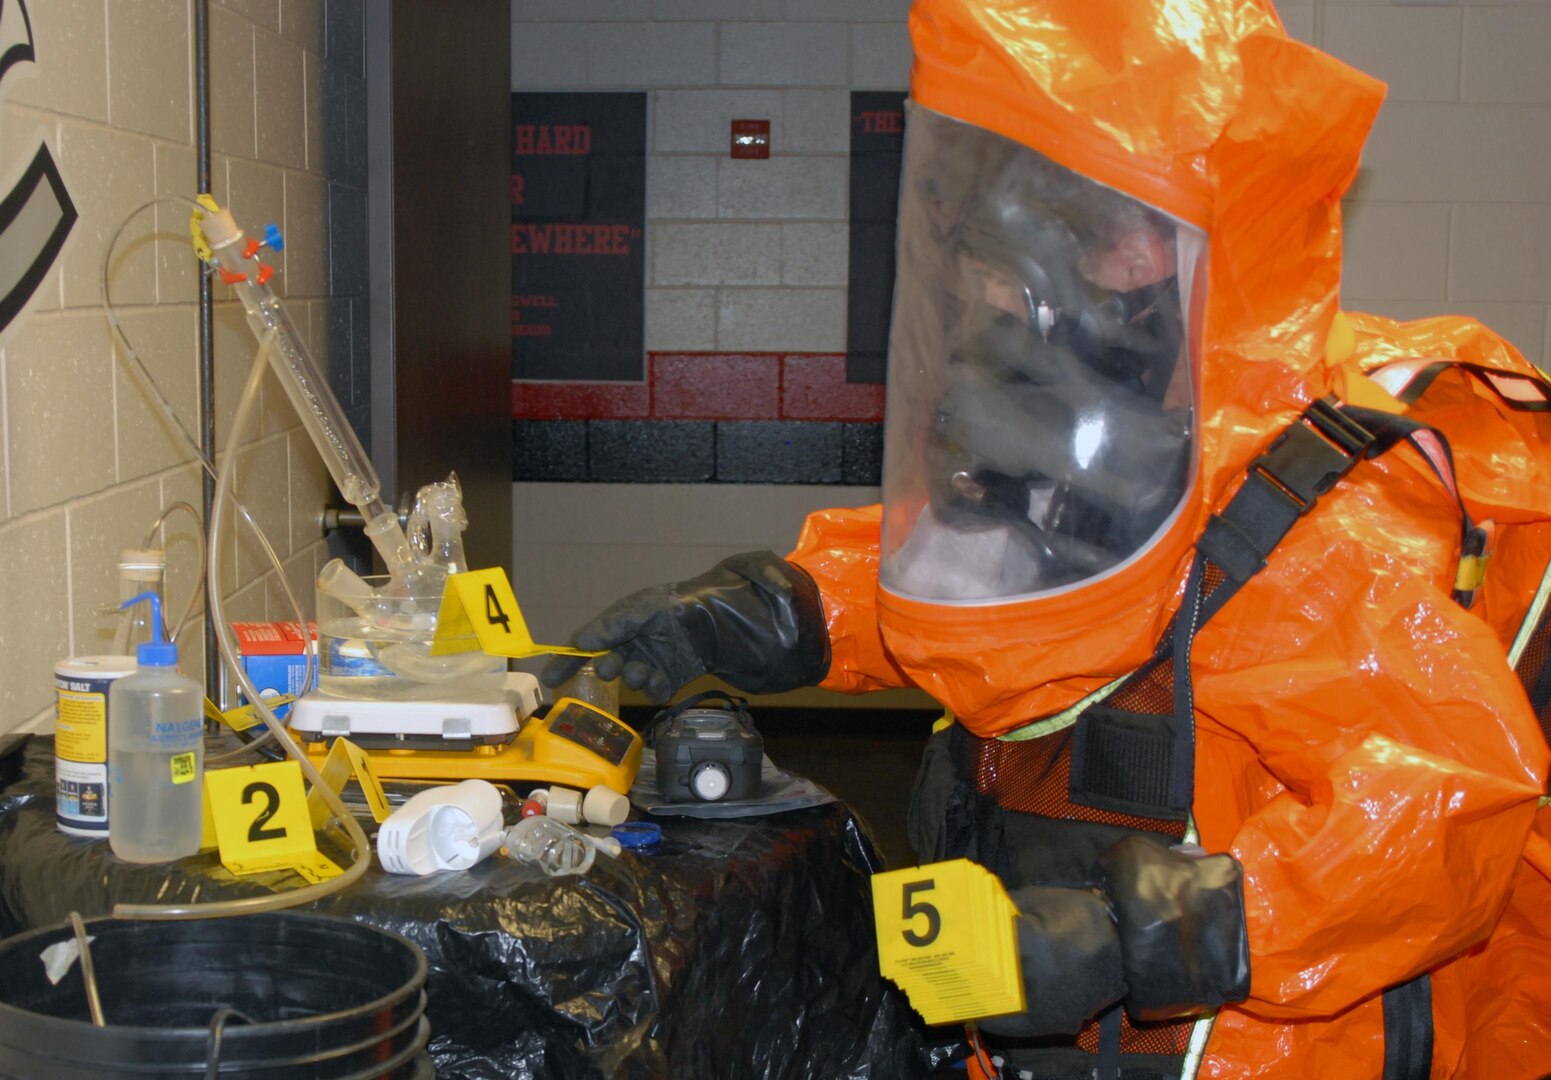 2nd Civil Support Team (CST) member Staff Sgt. Joshua Spagnola uses evidence markers to tag suspected hazardous materials in a mock WMD laboratory during the 2nd CST's training exercise at Joseph L. Bruno Stadium in Troy, N.Y. on April 12, 2017. Team members are trained to identify chemical, biological, and radiological agents and advise first-responders on how to deal with these materials. 